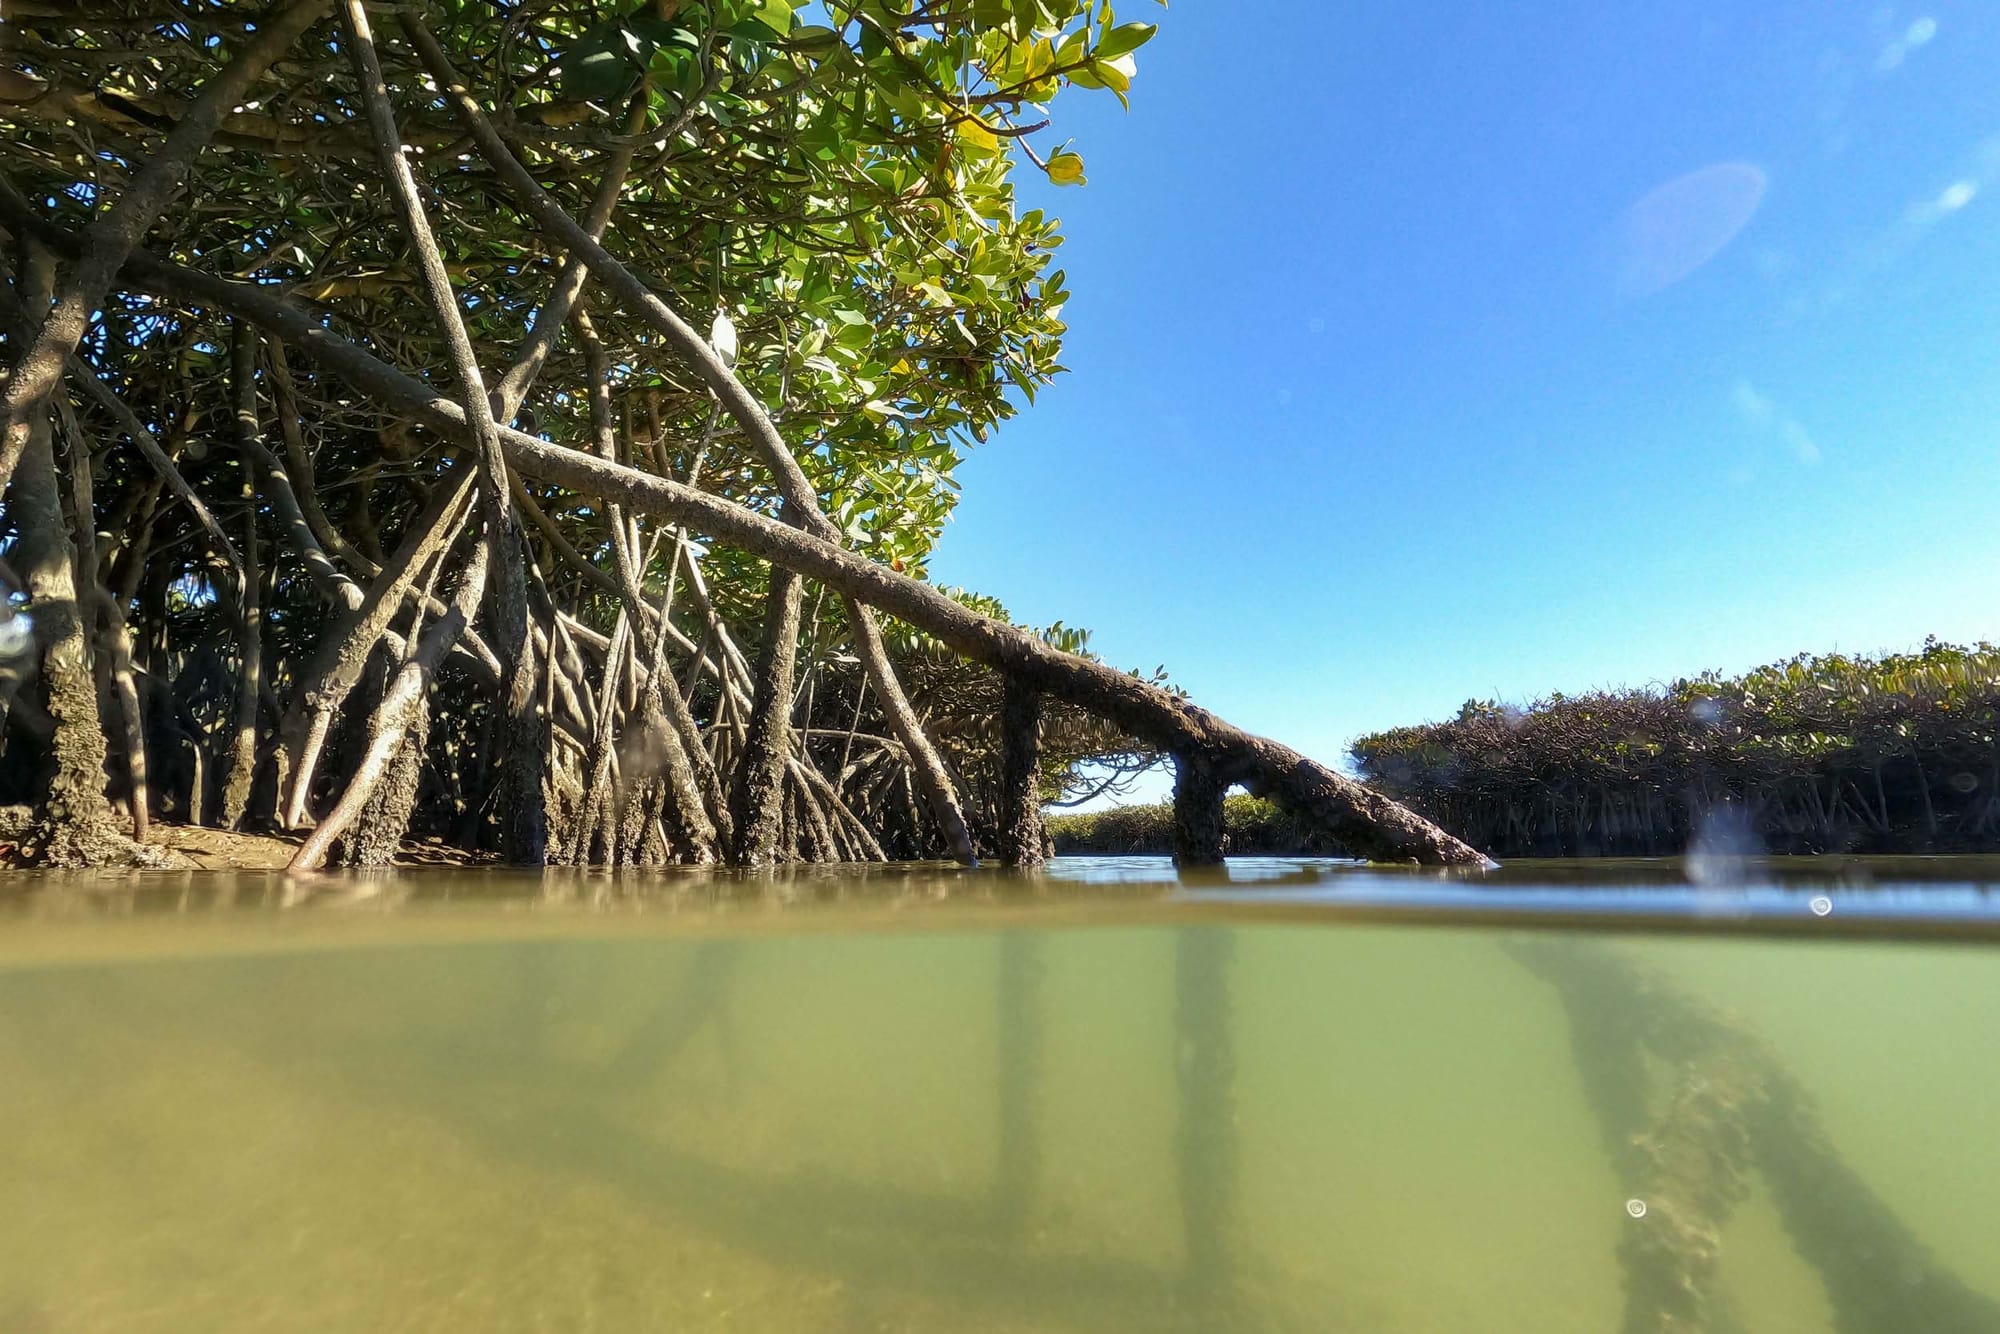 Looking up at mangroves from the water level